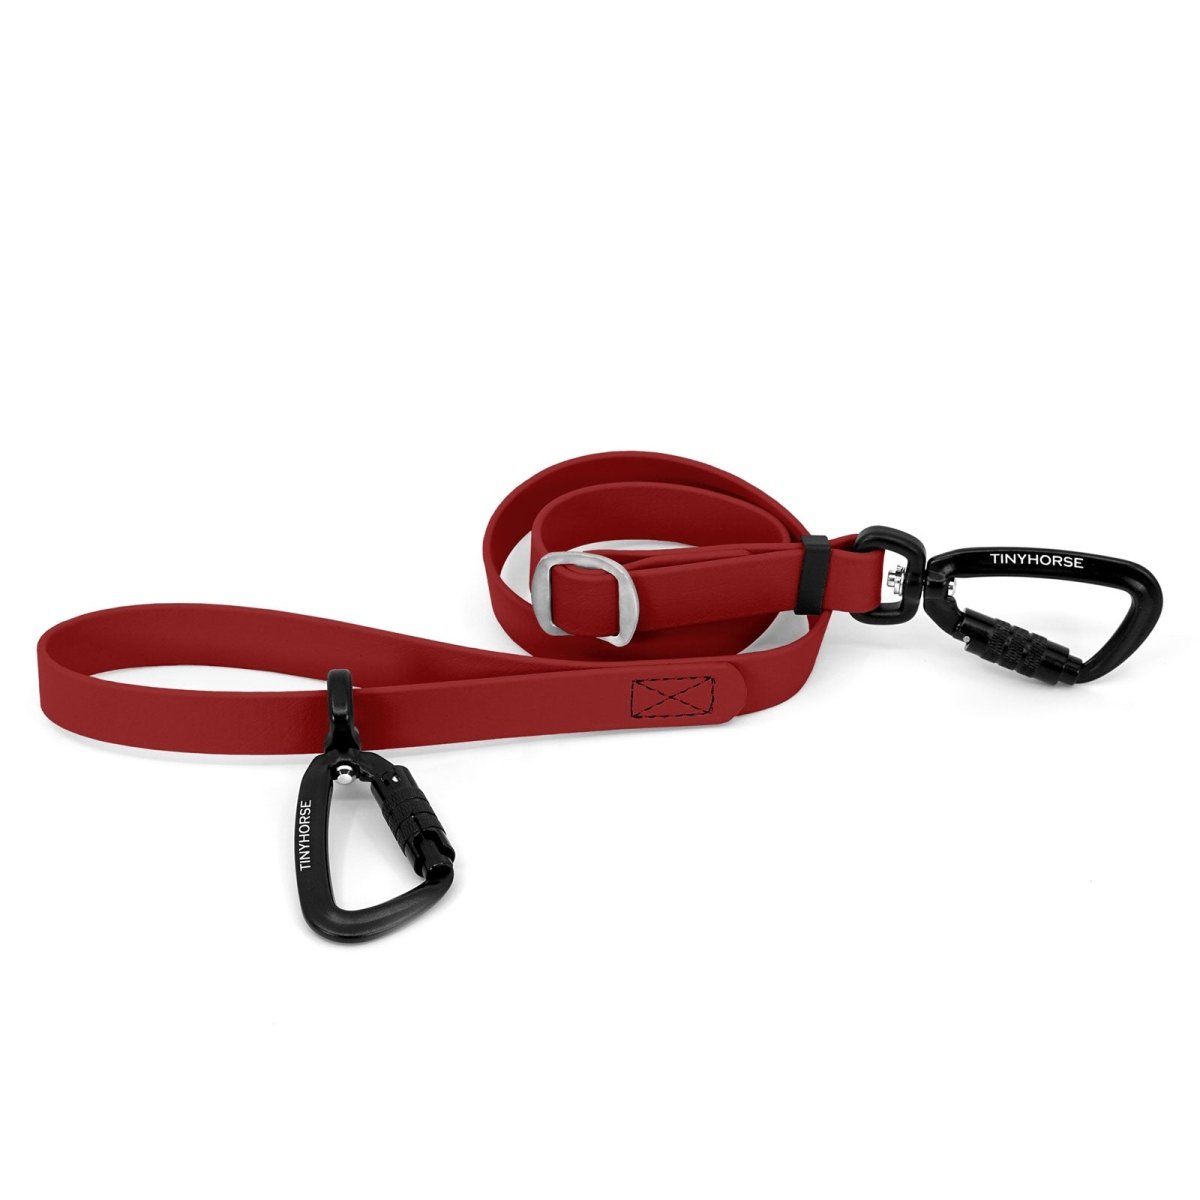 An adjustable red-coloured Lead-All Pro made of BioThane with 2 auto-locking carabiners